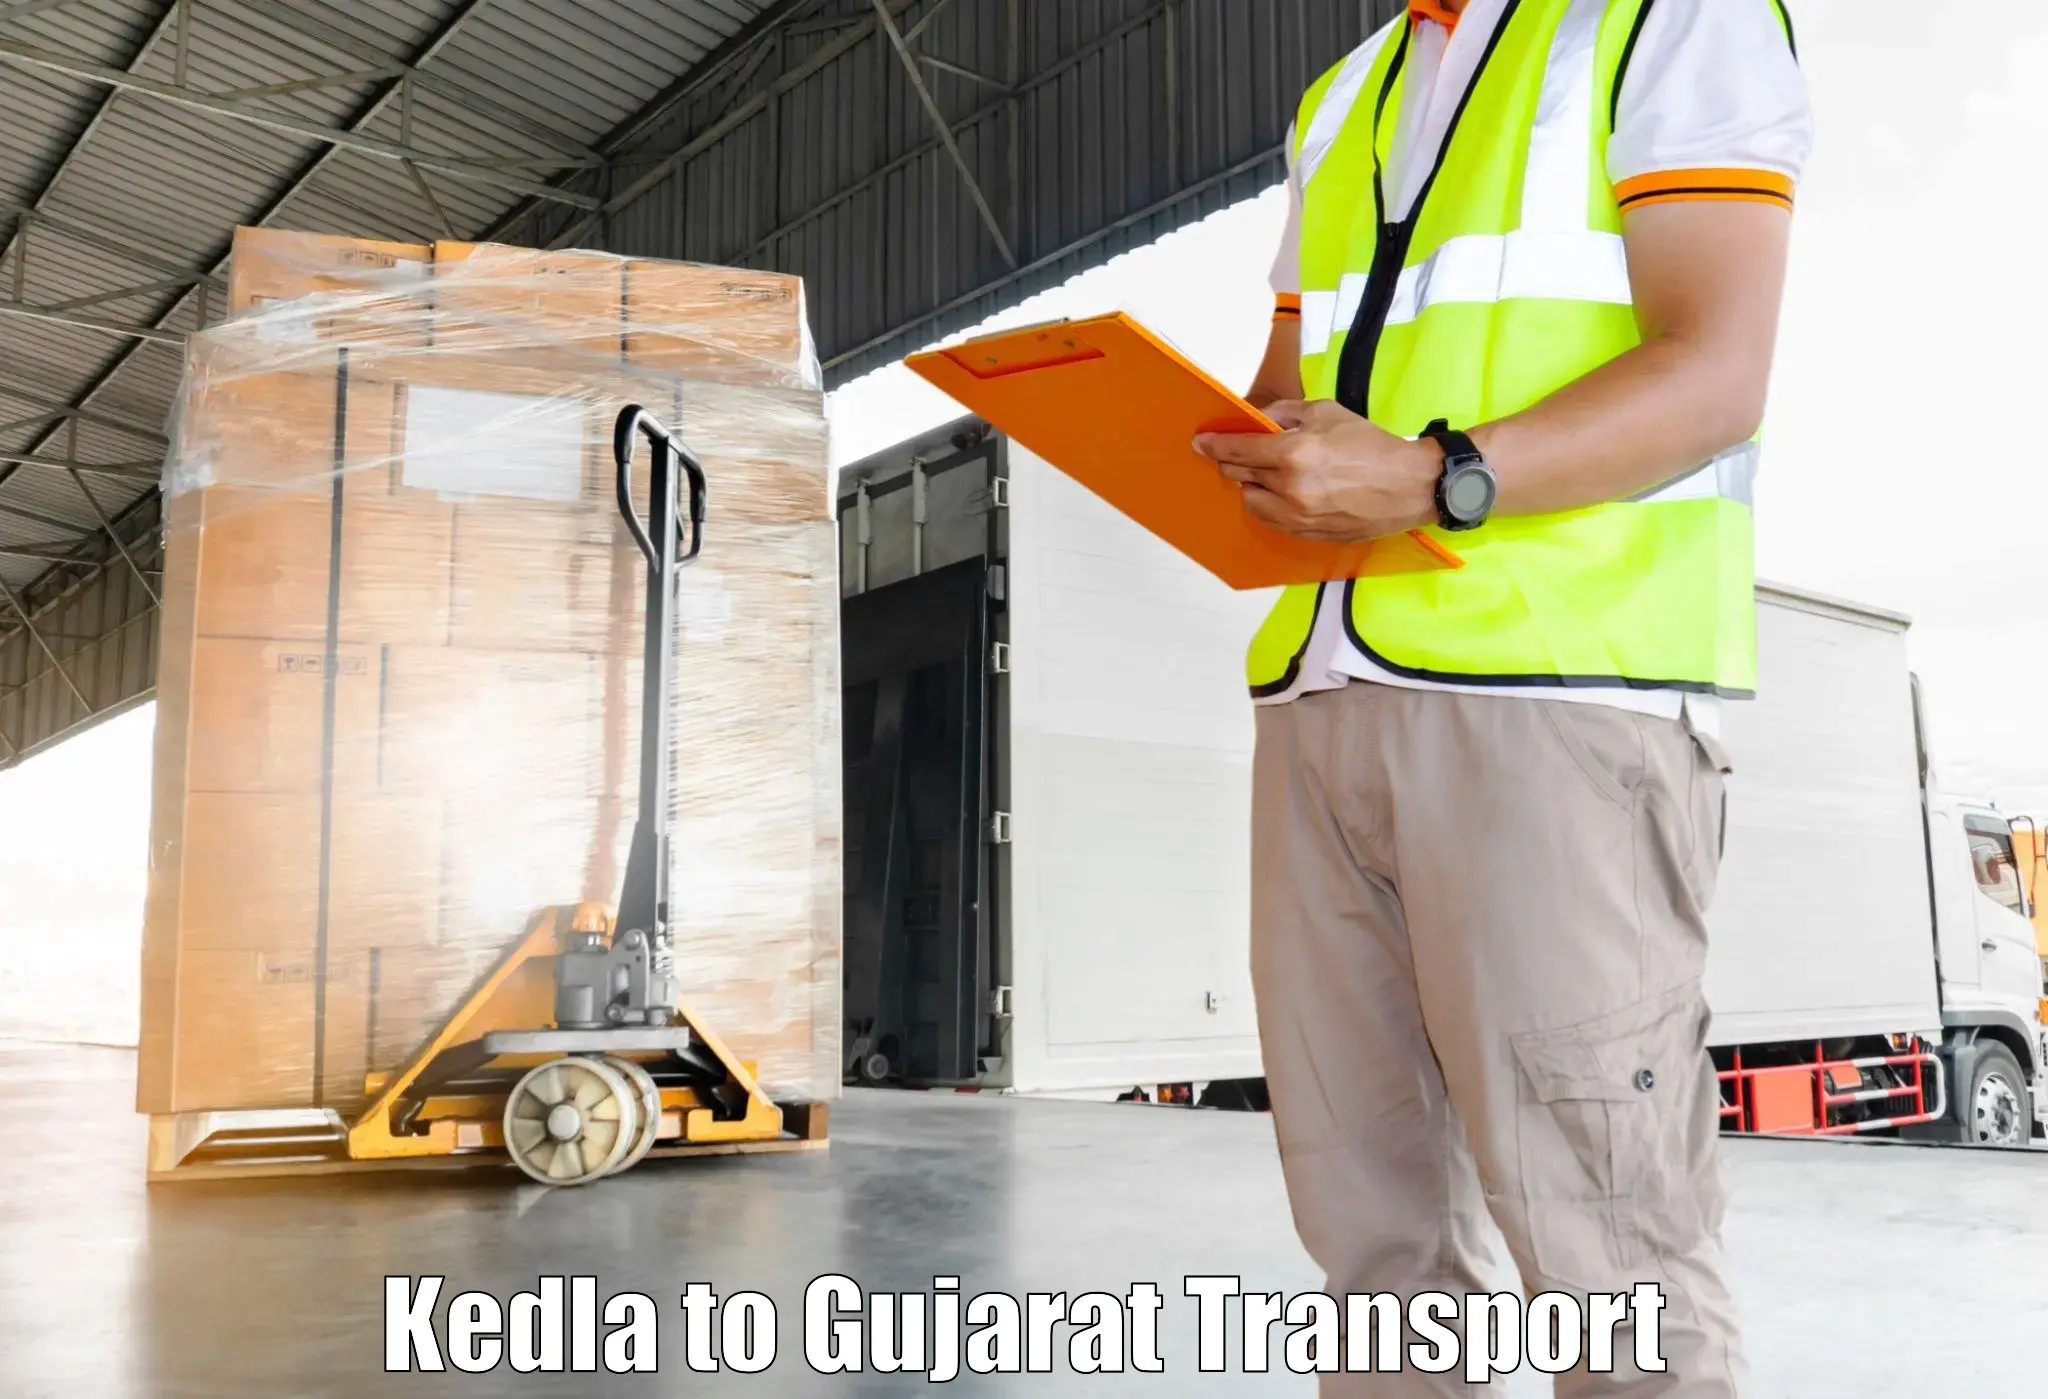 Transport bike from one state to another Kedla to Gujarat